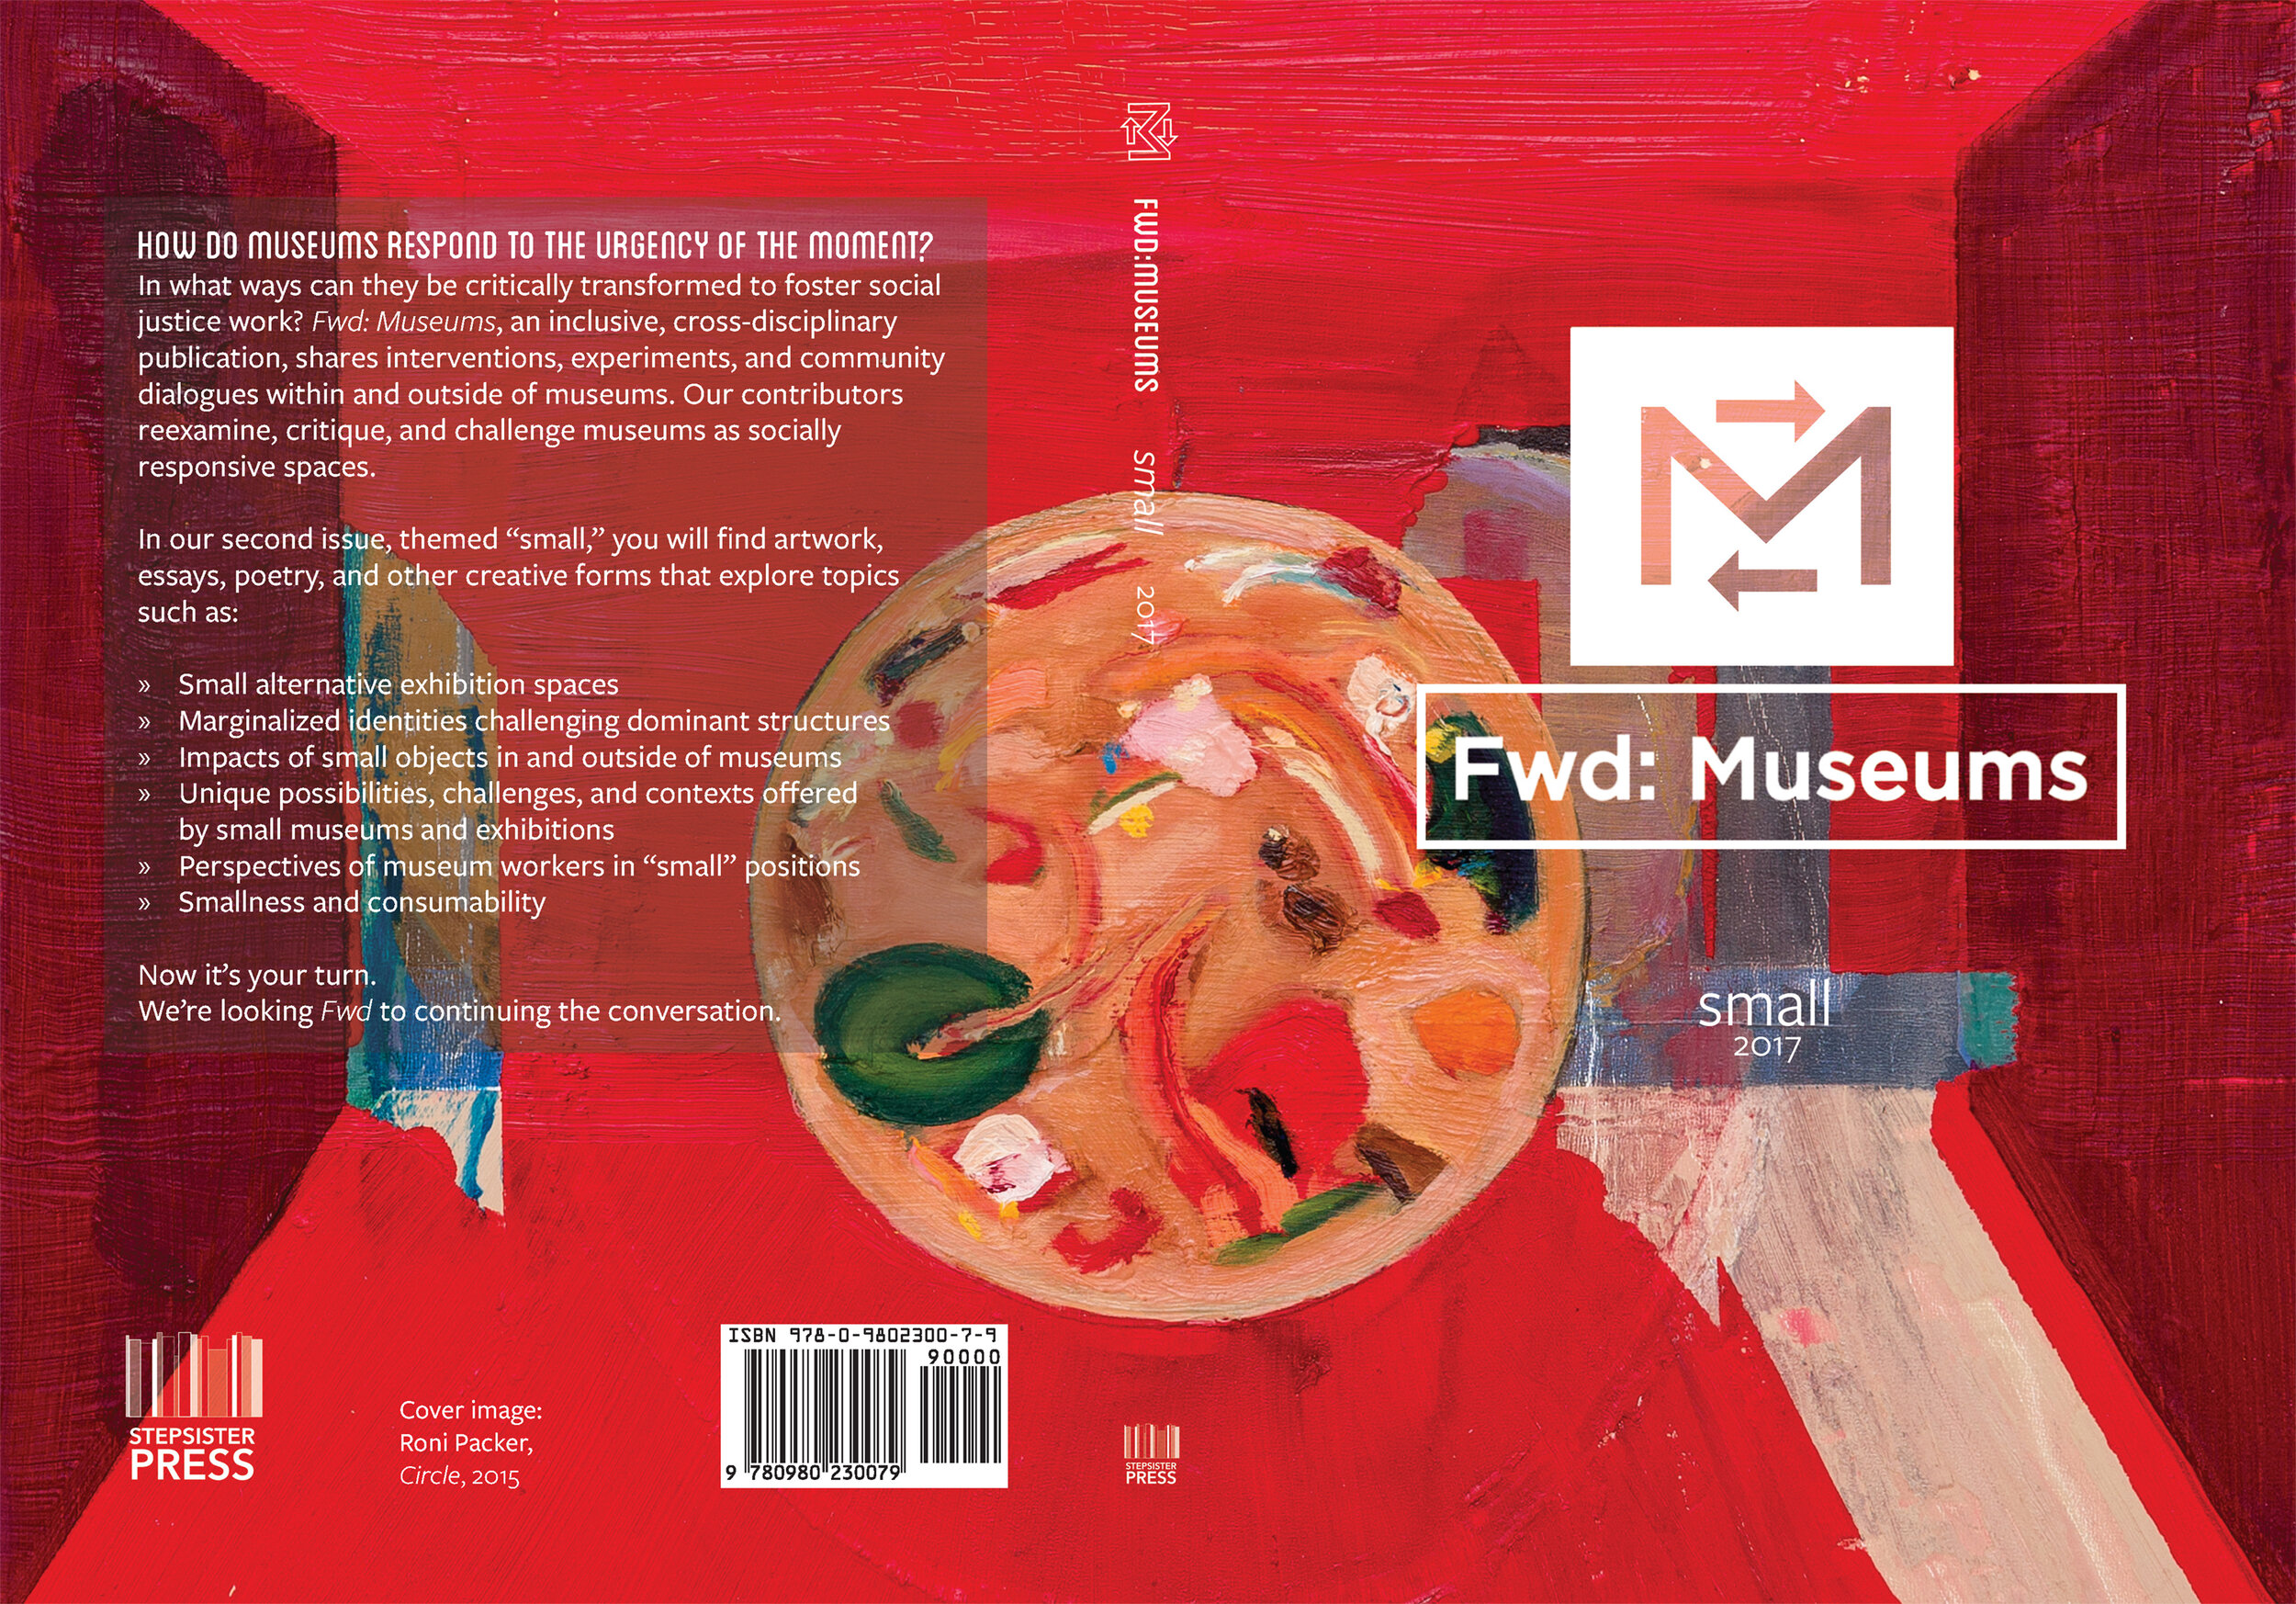  full cover layout.  Fwd: Museums : Small. Published by StepSister Press. painting by Roni Packer.  